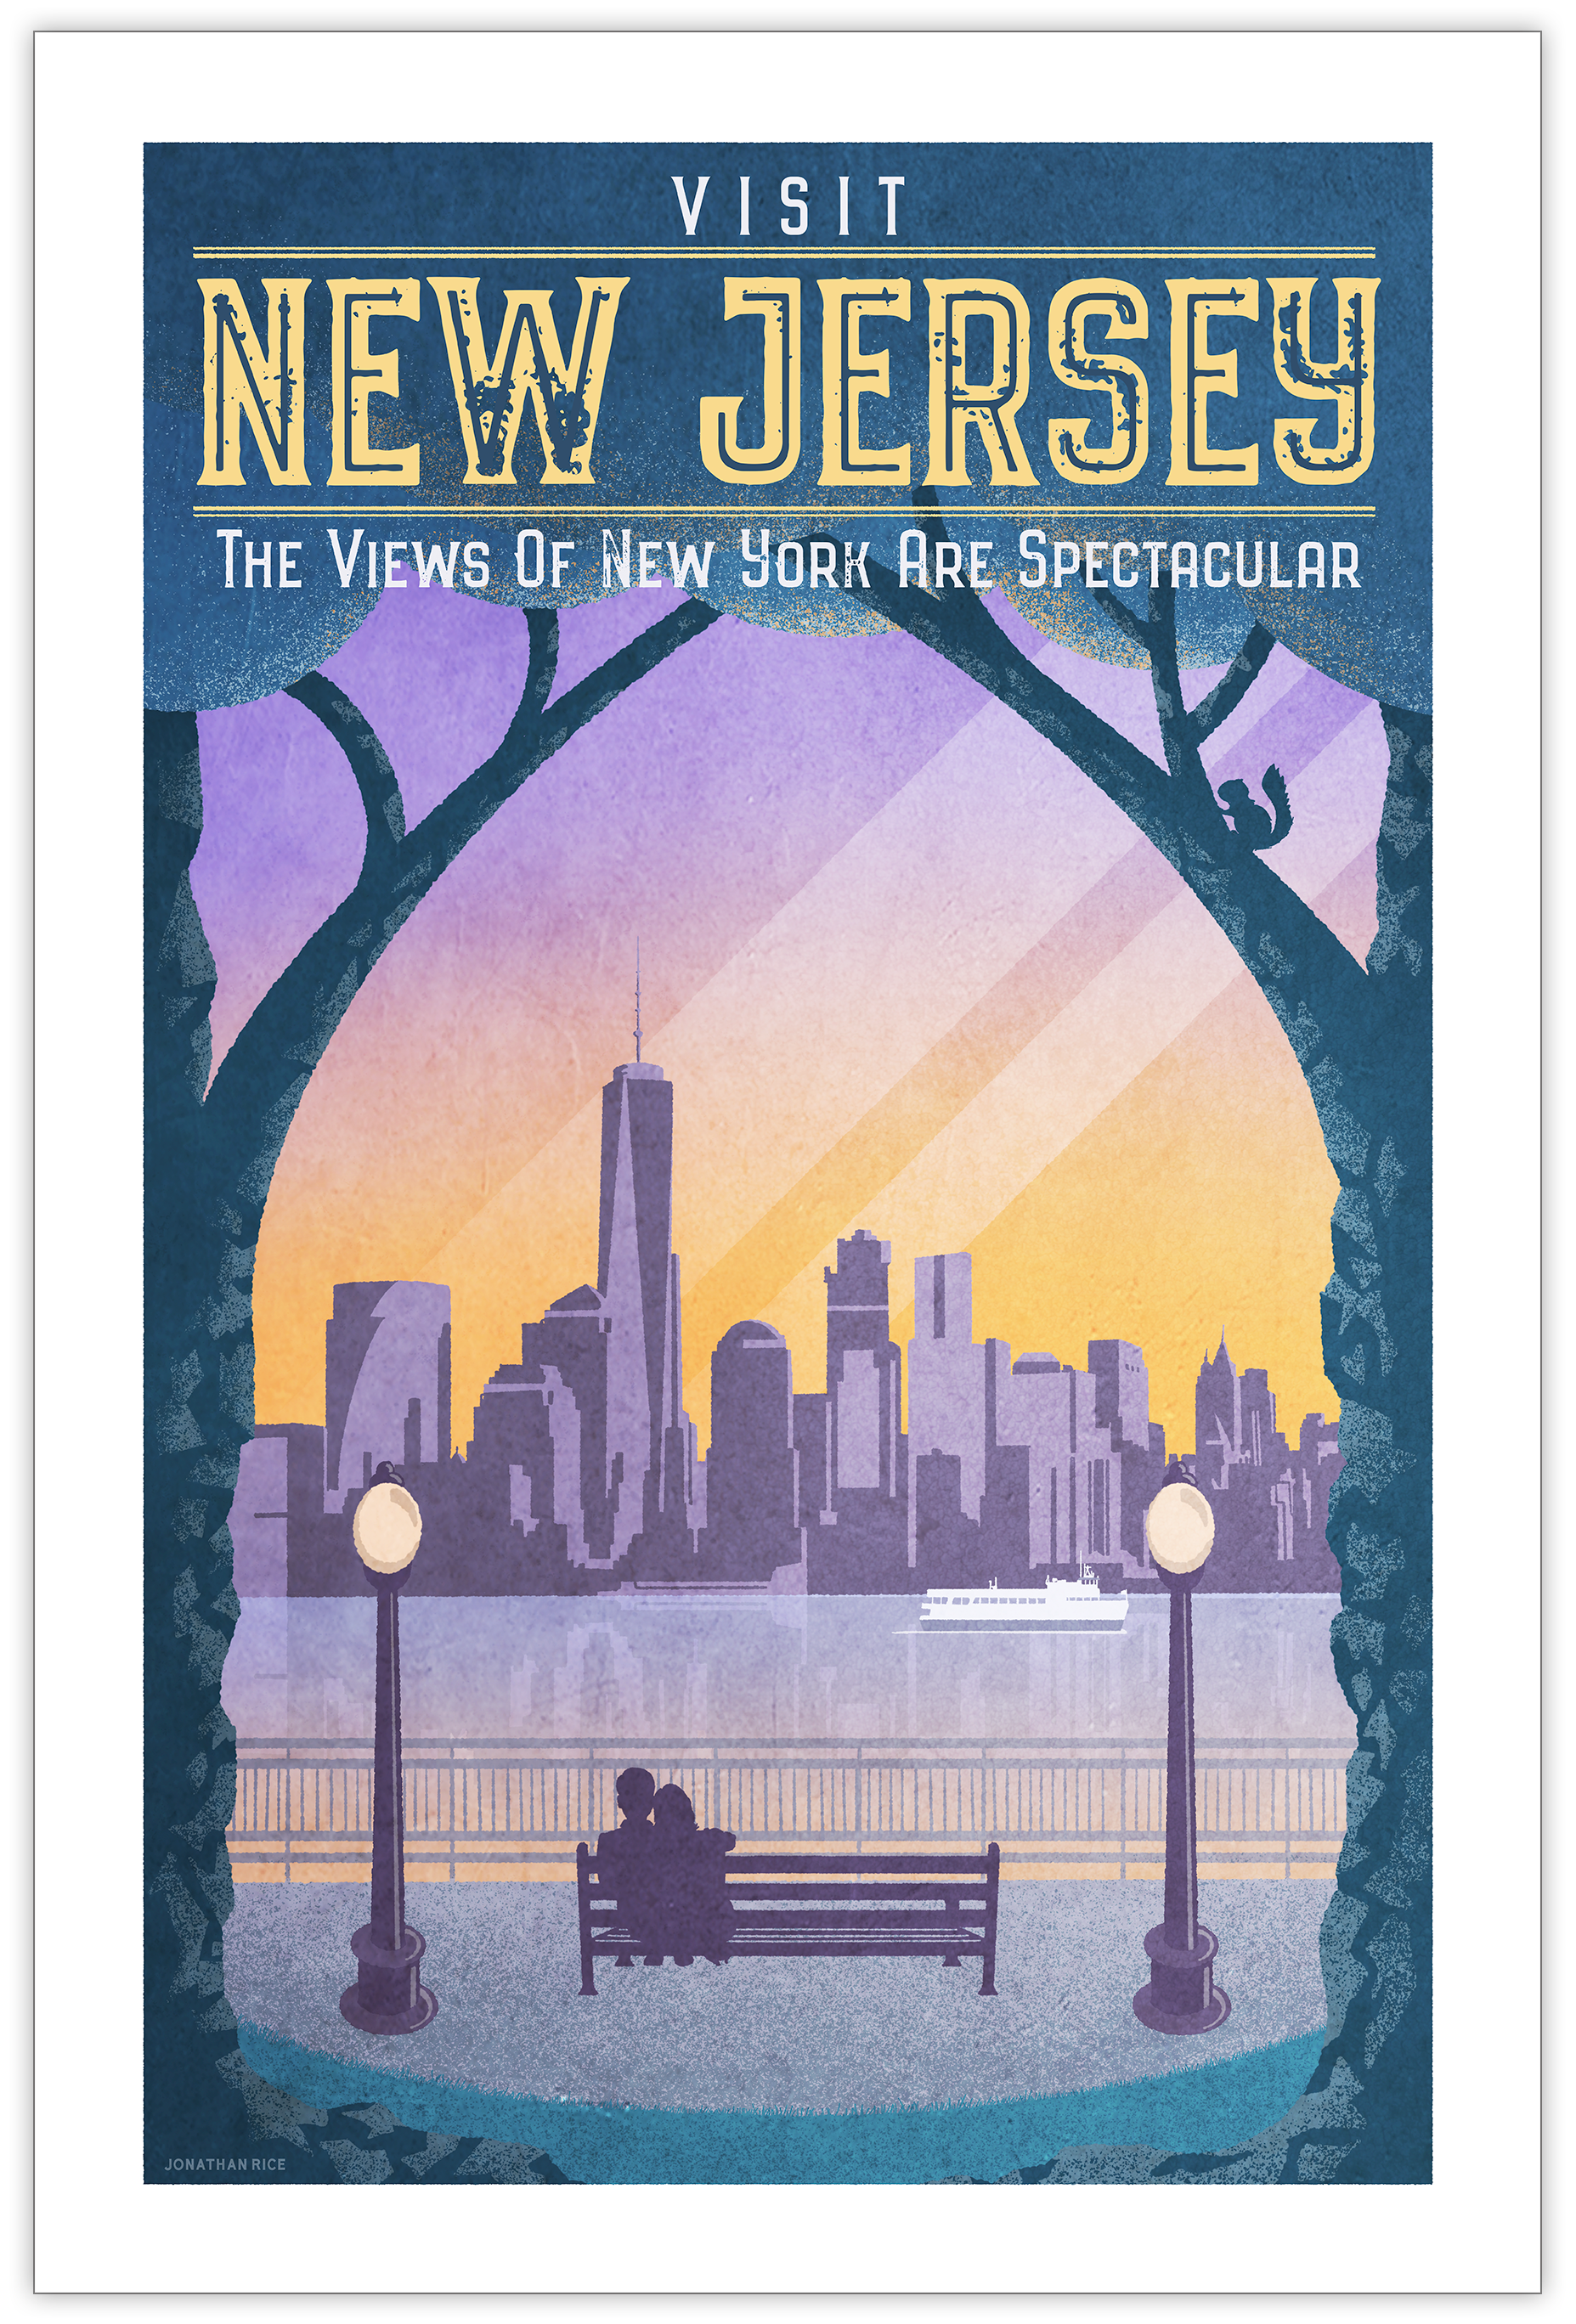 Minimalist style travel poster of a couple on a bench in New Jersey looking at the beautiful Manhattan Skyline.